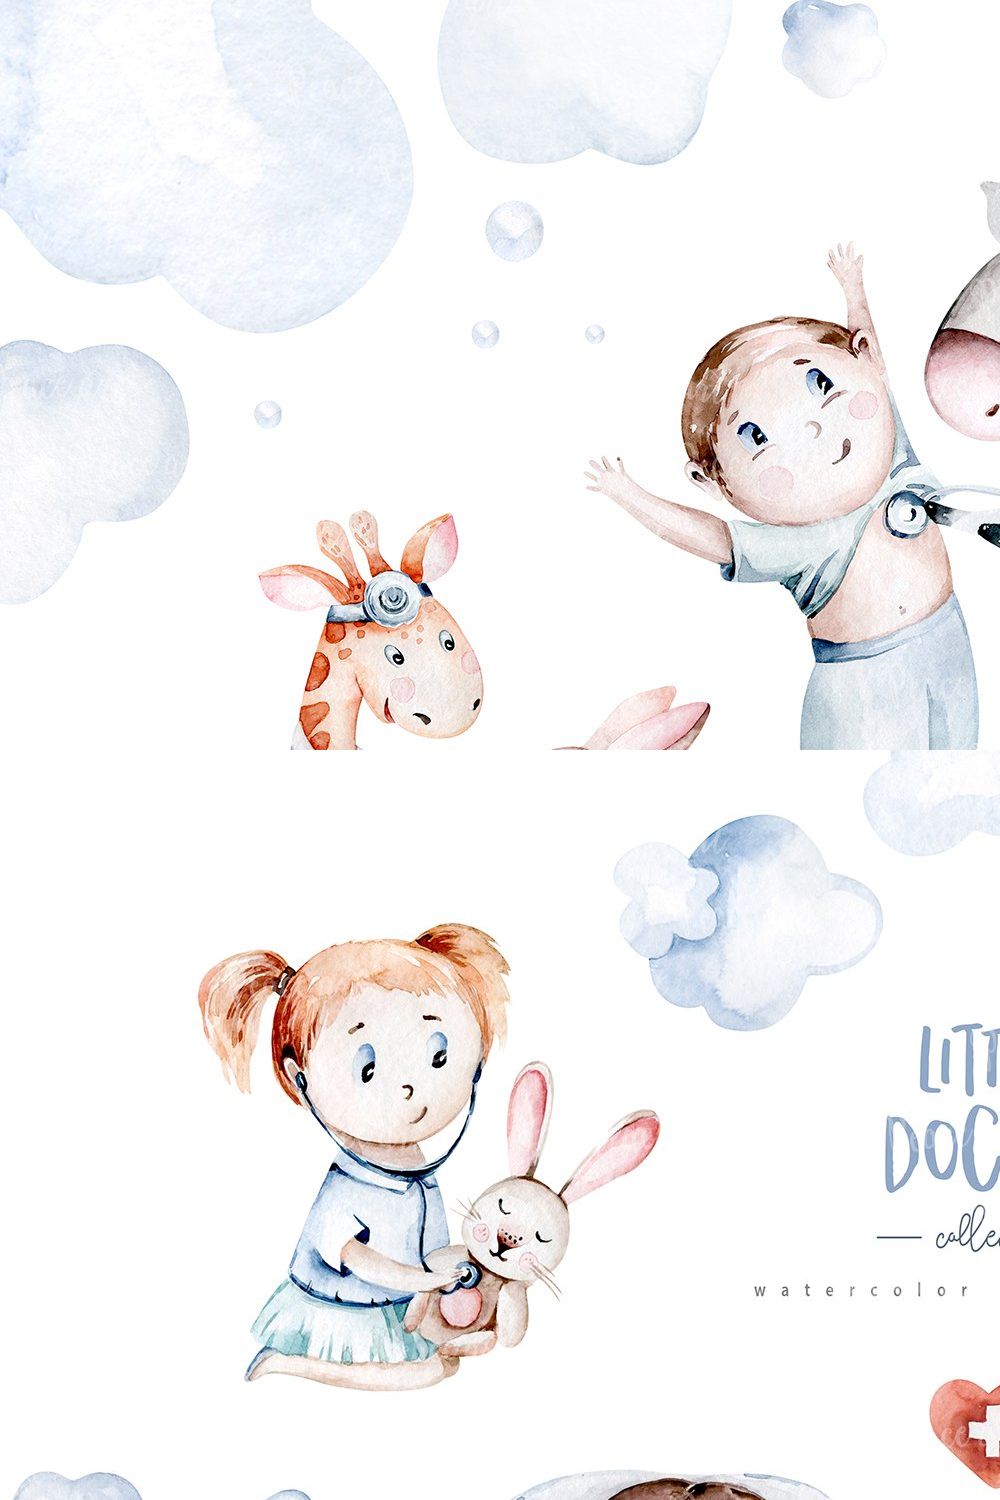 Little doctor cute collection pinterest preview image.